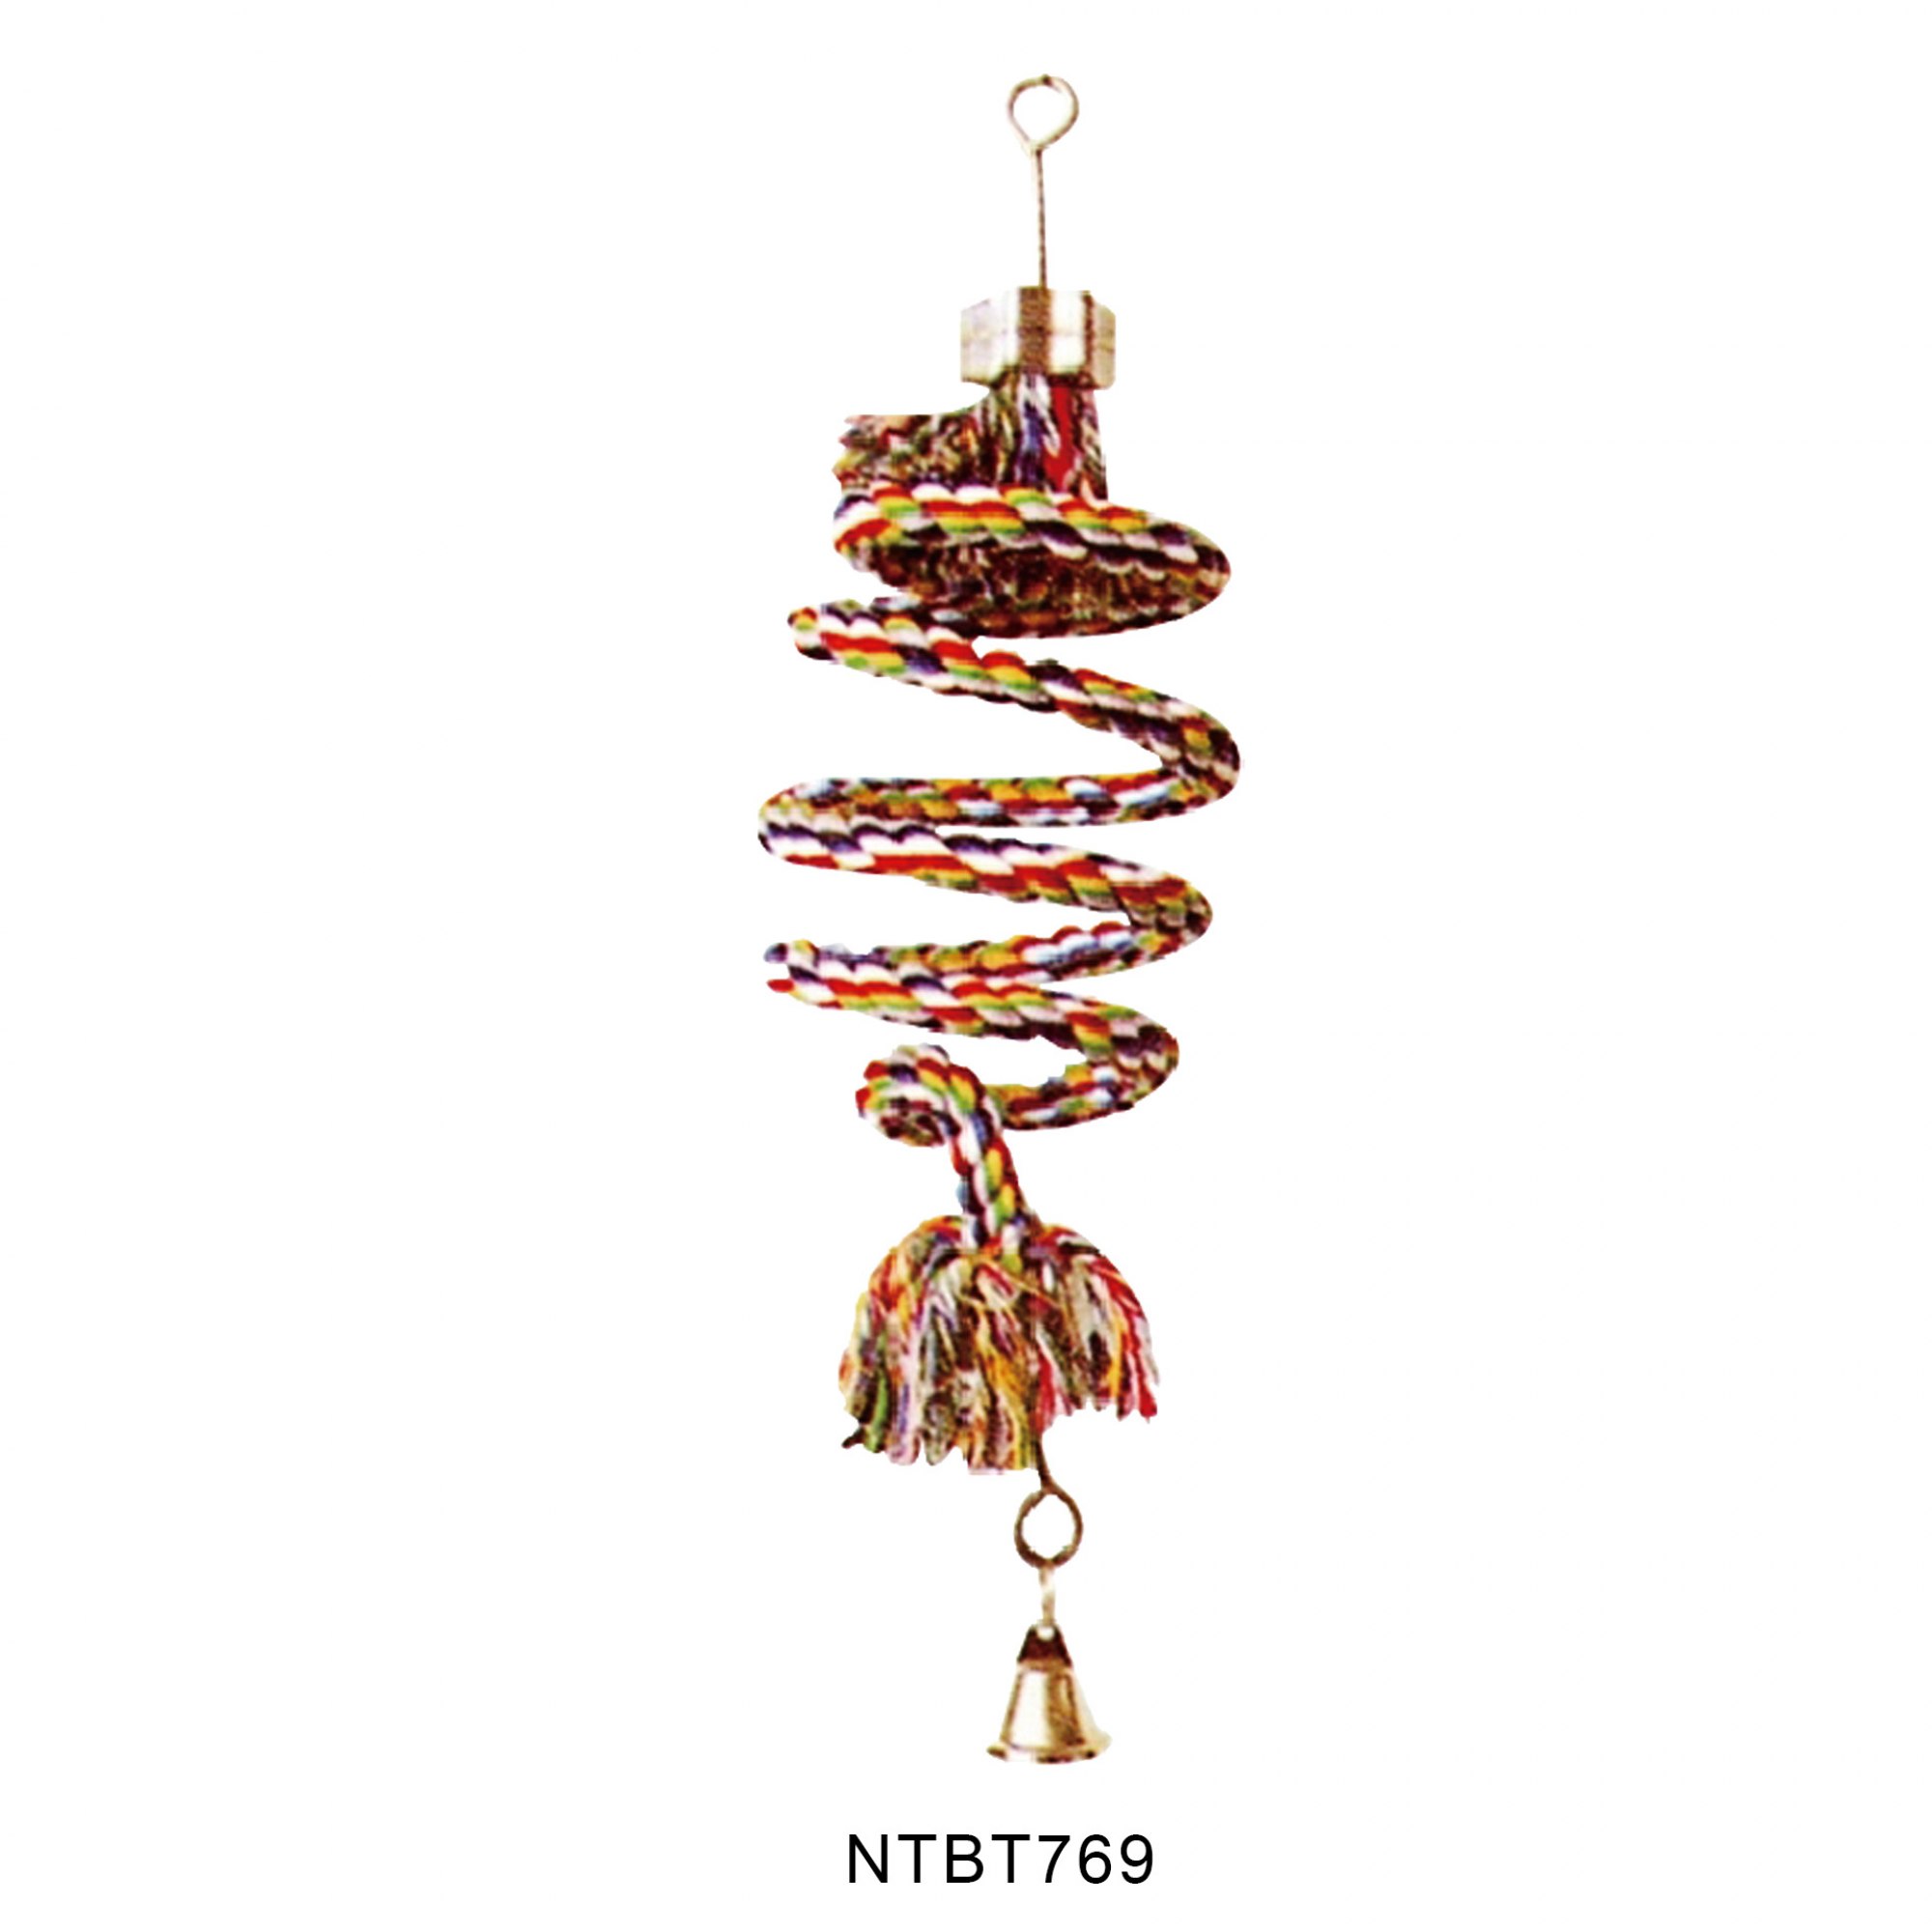 OPSP - 769 - Spiral Colored Rope Bird Toy 16